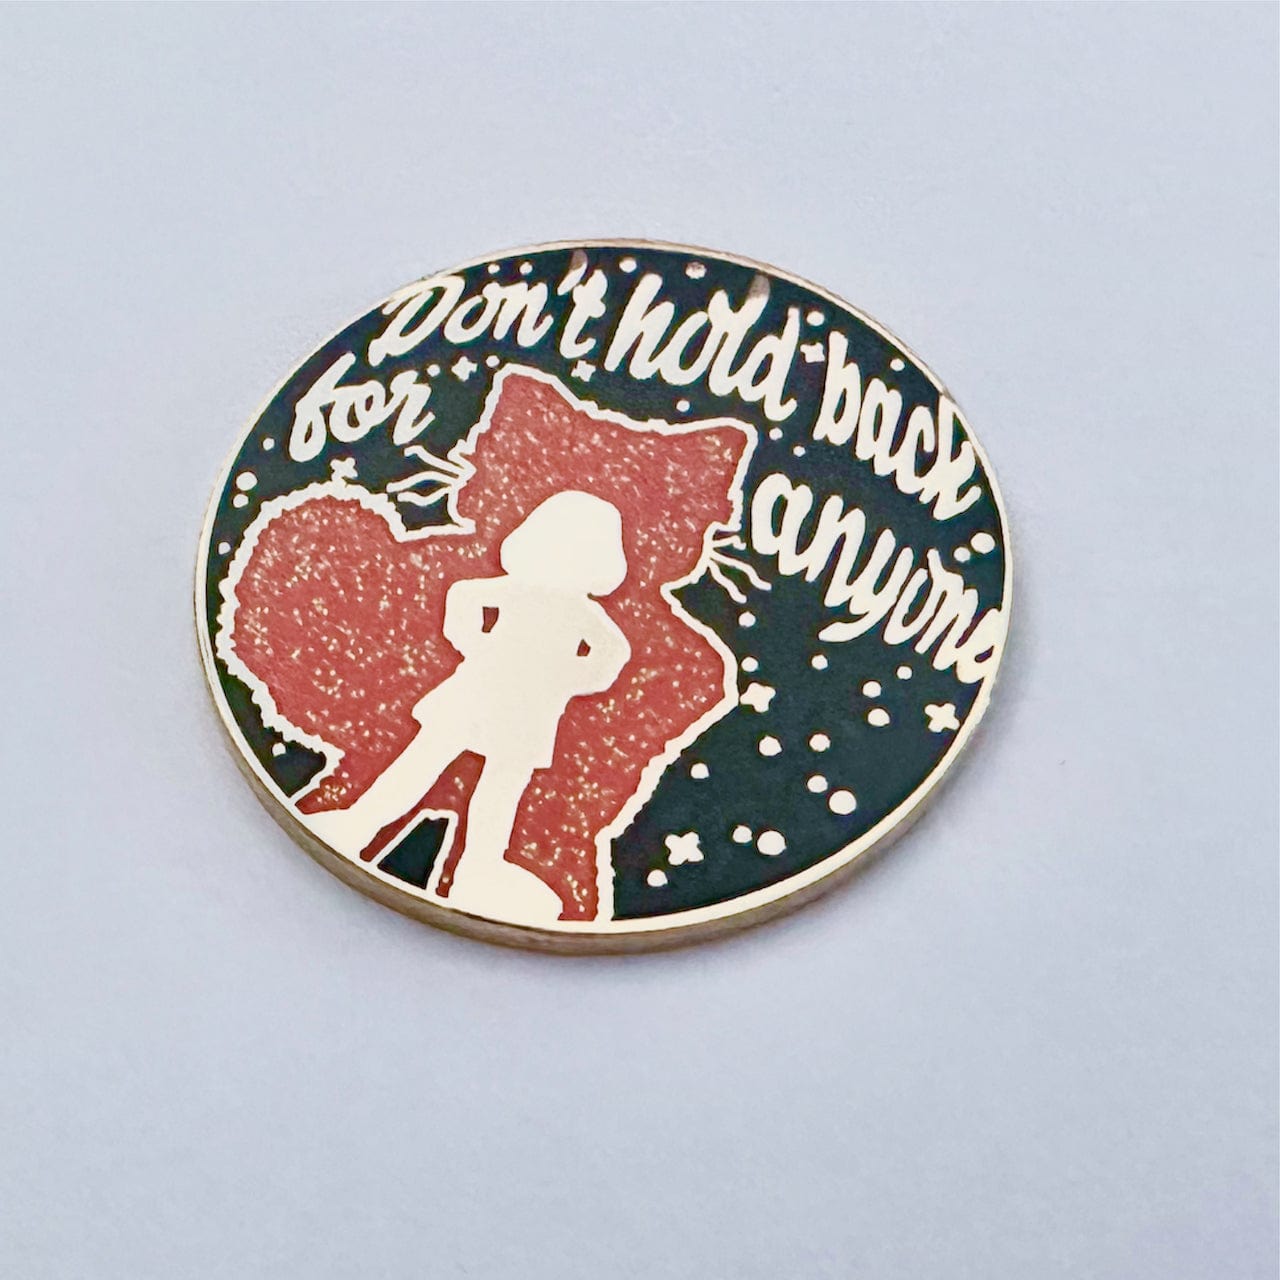 Pinbuds Enamel pin Red panda pin featuring quote "Don't hold back. For anyone. The farther you go, the prouder I'll be."limited edition)